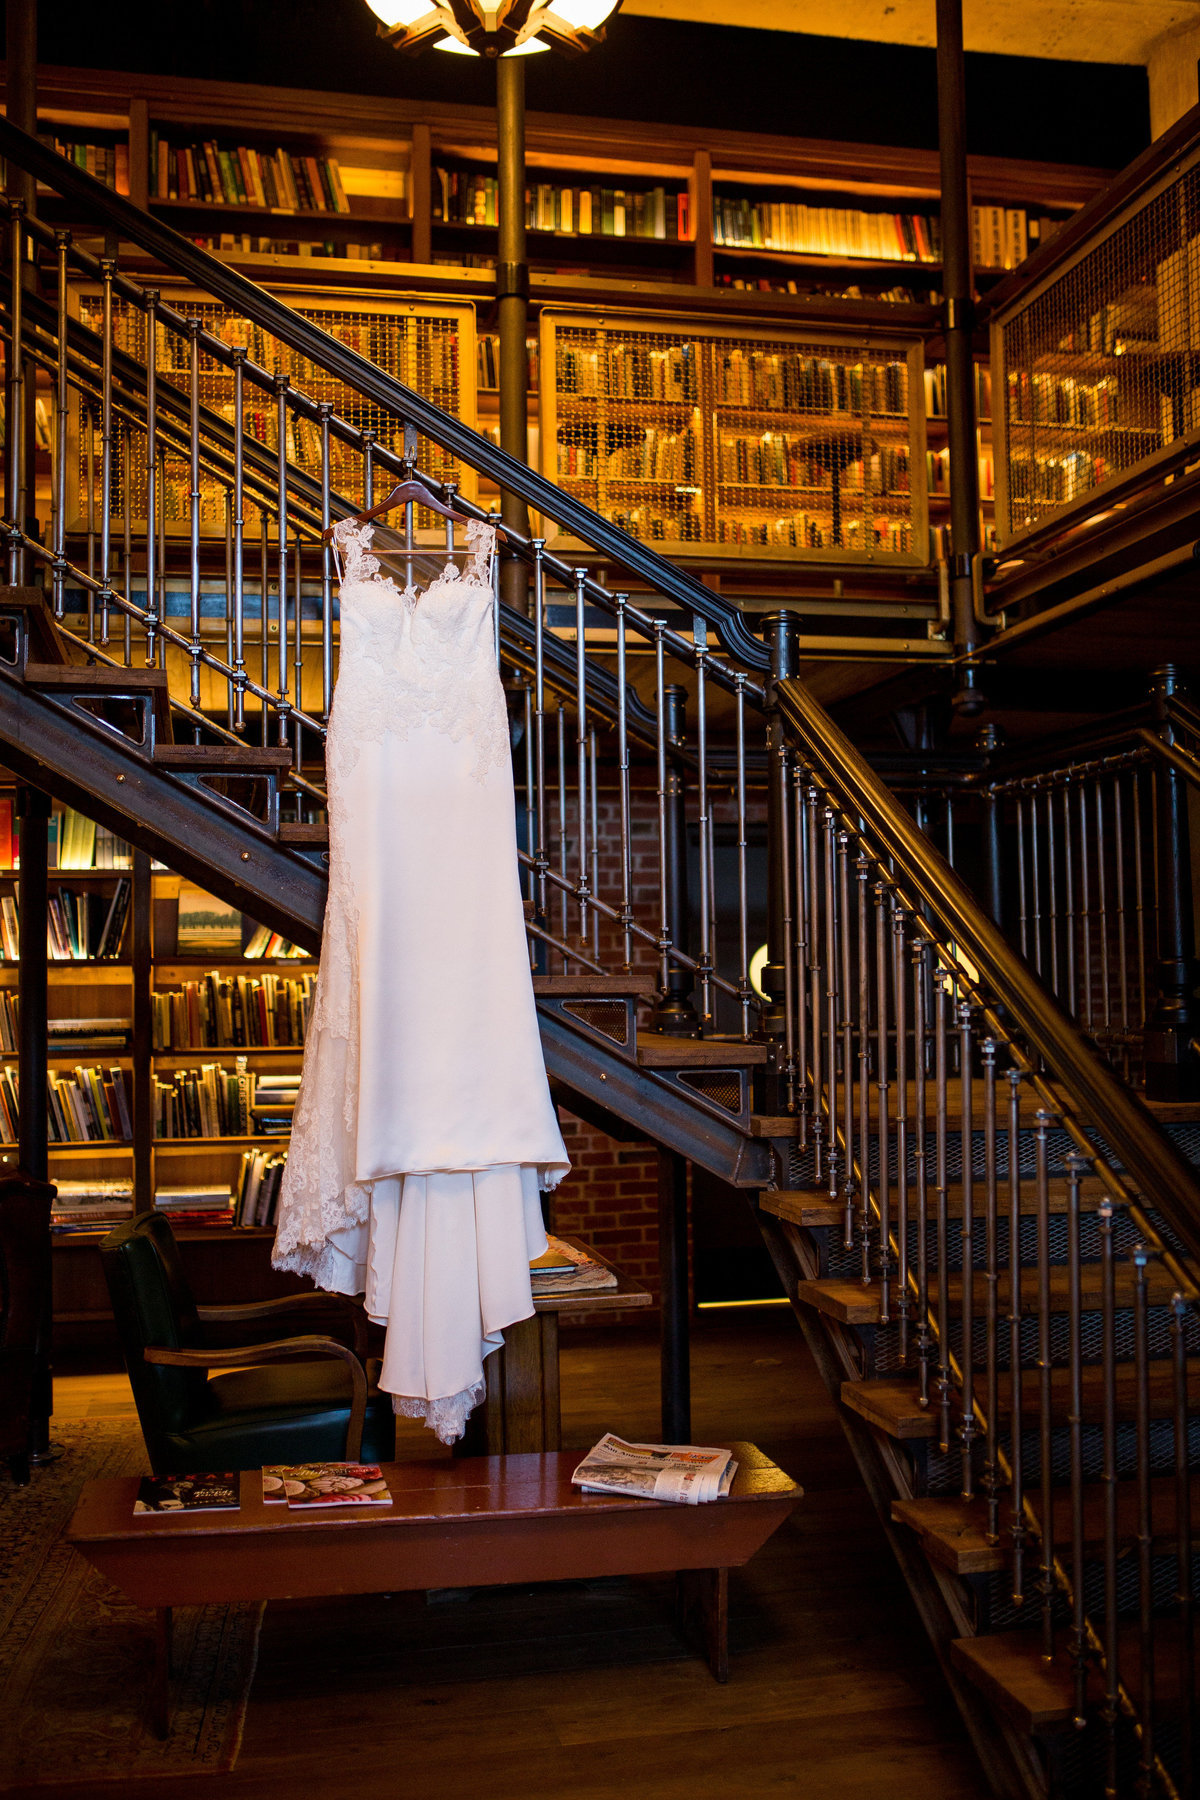 Bridal gown hanging on staircase in library at The Hotel Emma wedding venue in The historic Pearl in down town san antonio